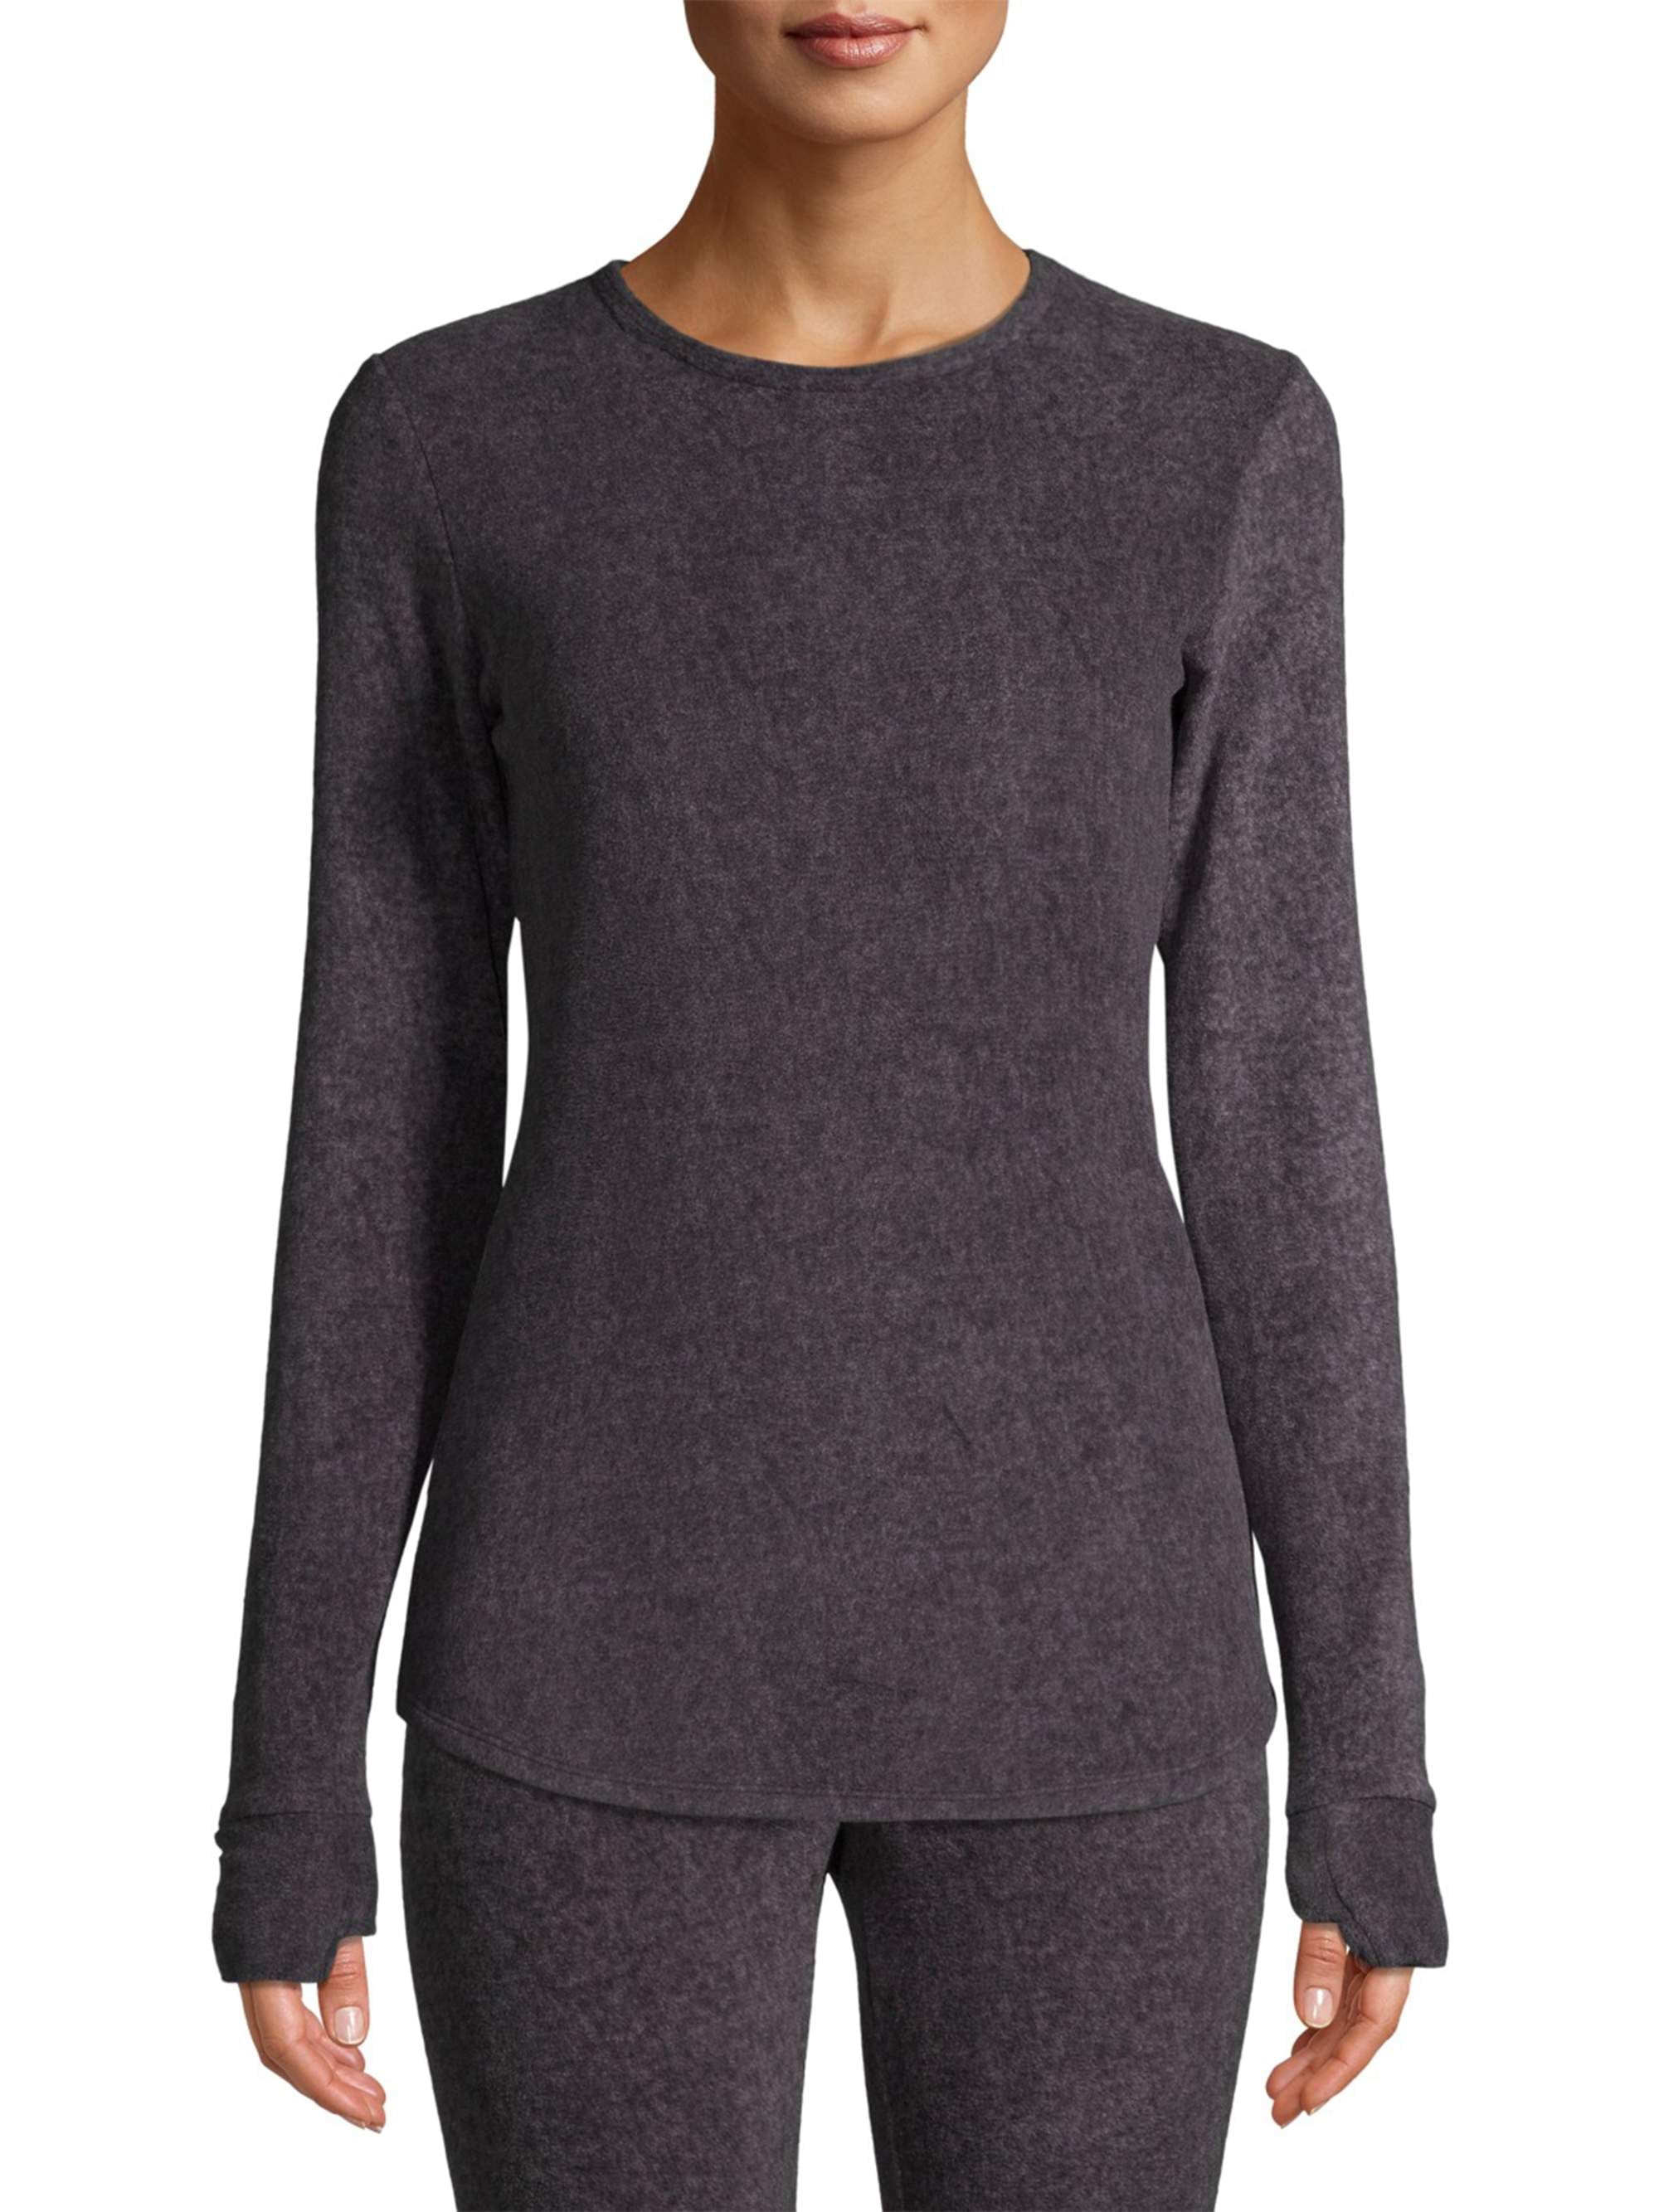 ClimateRight by Cuddl Duds Stretch Fleece Women's Long Sleeve Crew